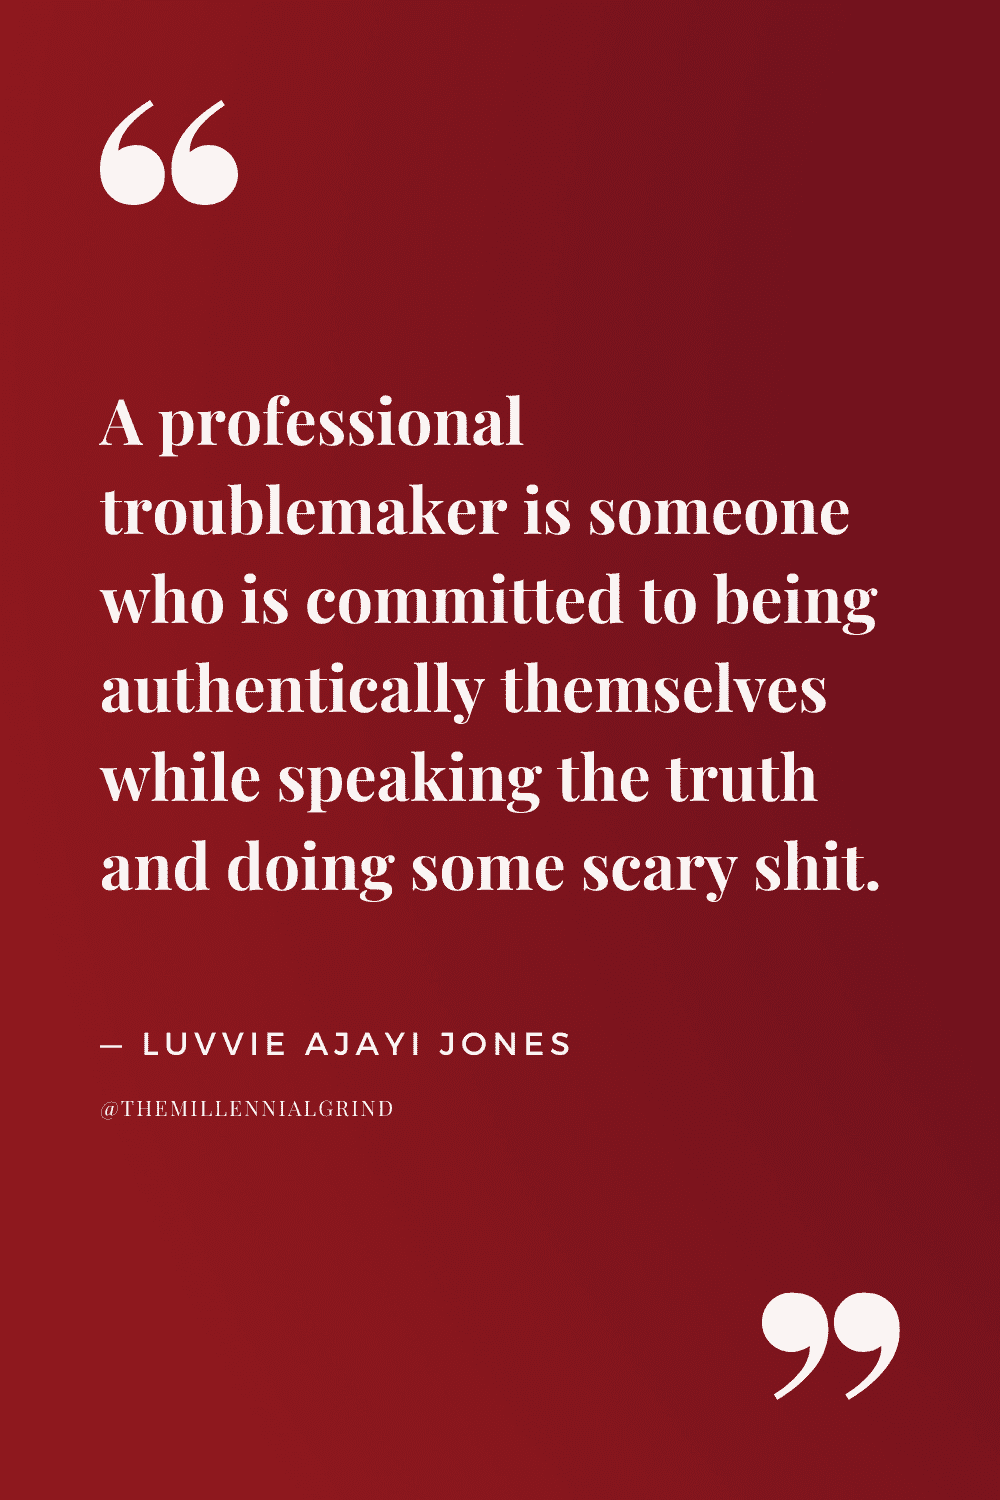 30 Quotes from Professional Troublemaker by Luvvie Ajayi Jones